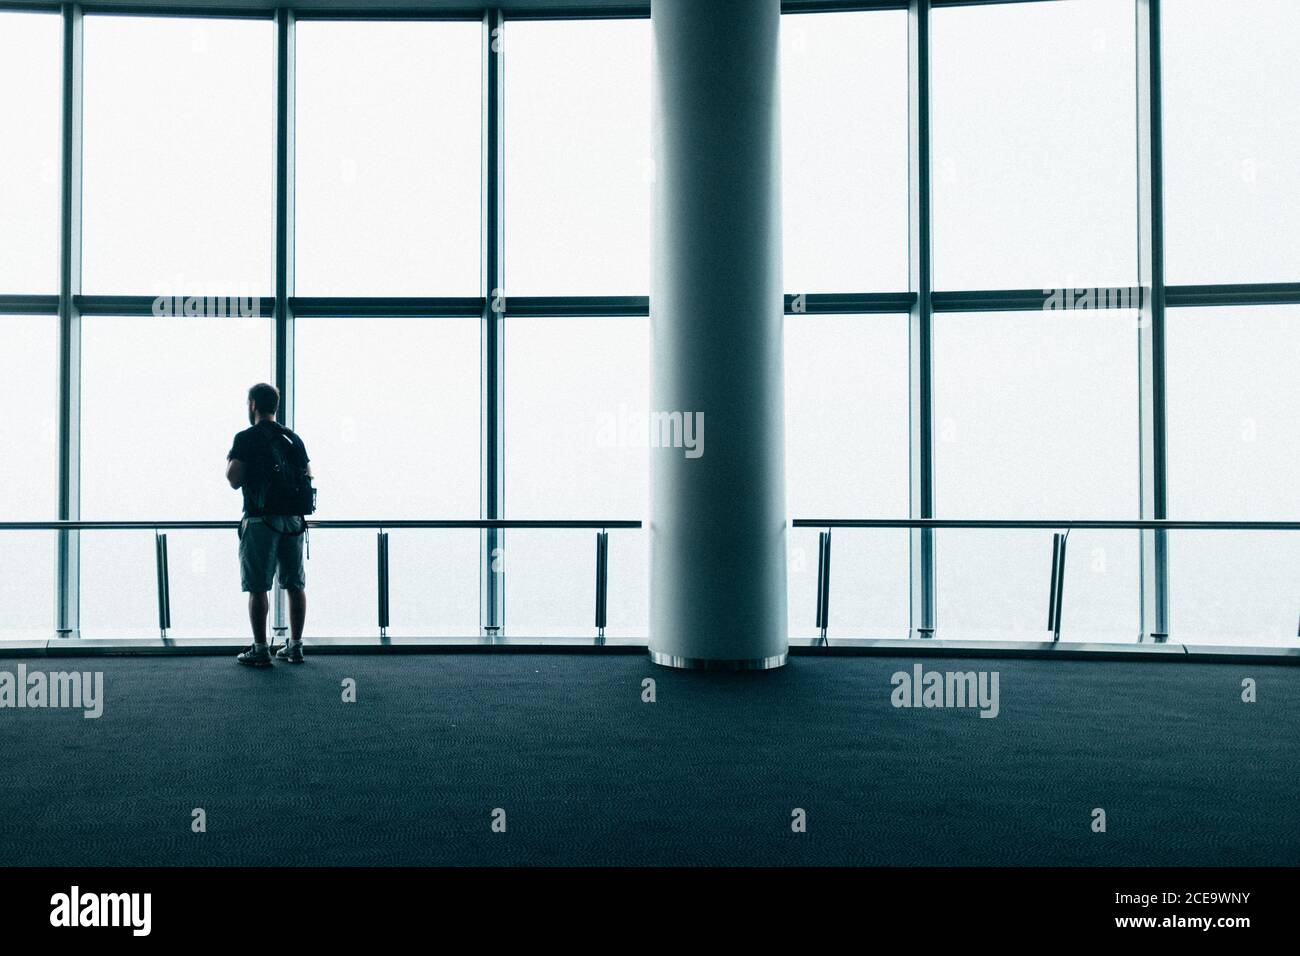 Back view of a person looking out of a window in modern building. Horizontal indoors shot. Stock Photo